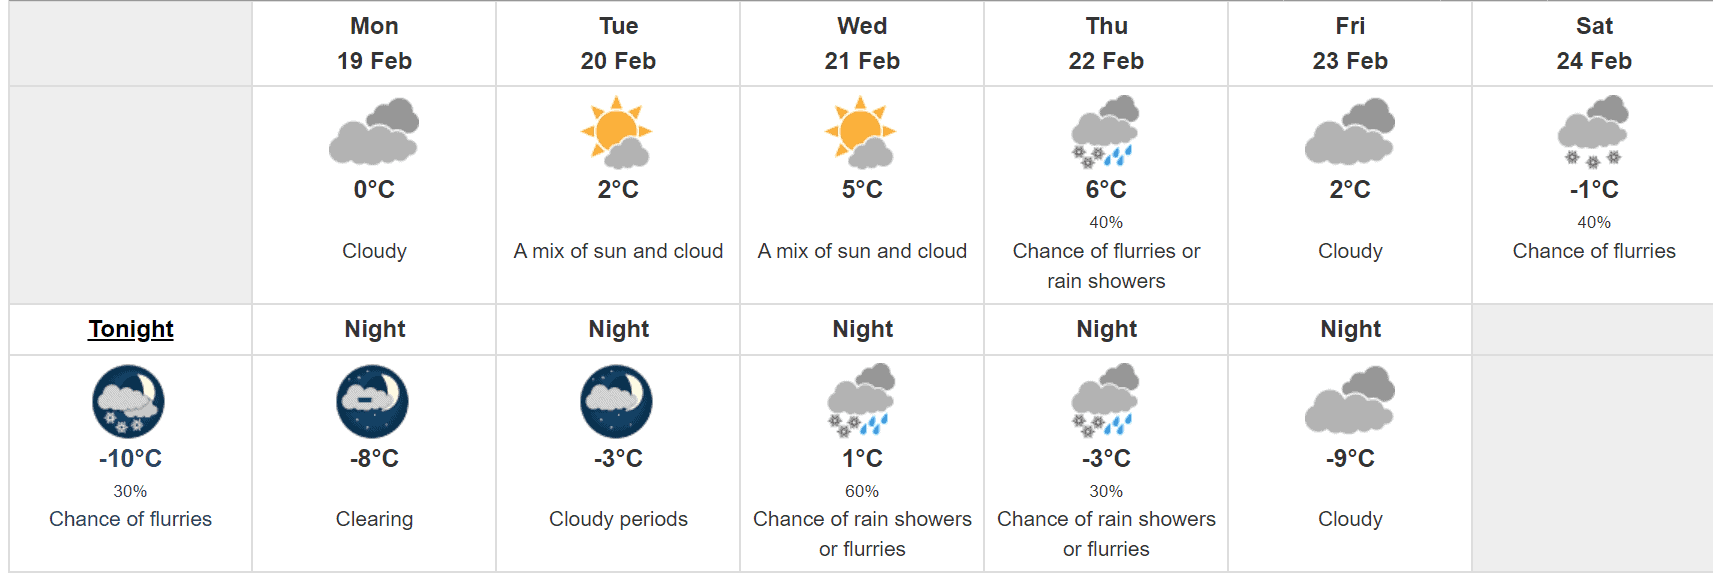 Cold Weather and snow, rain, sunshine, this week feb 18 to feb 24 in southern Ontario